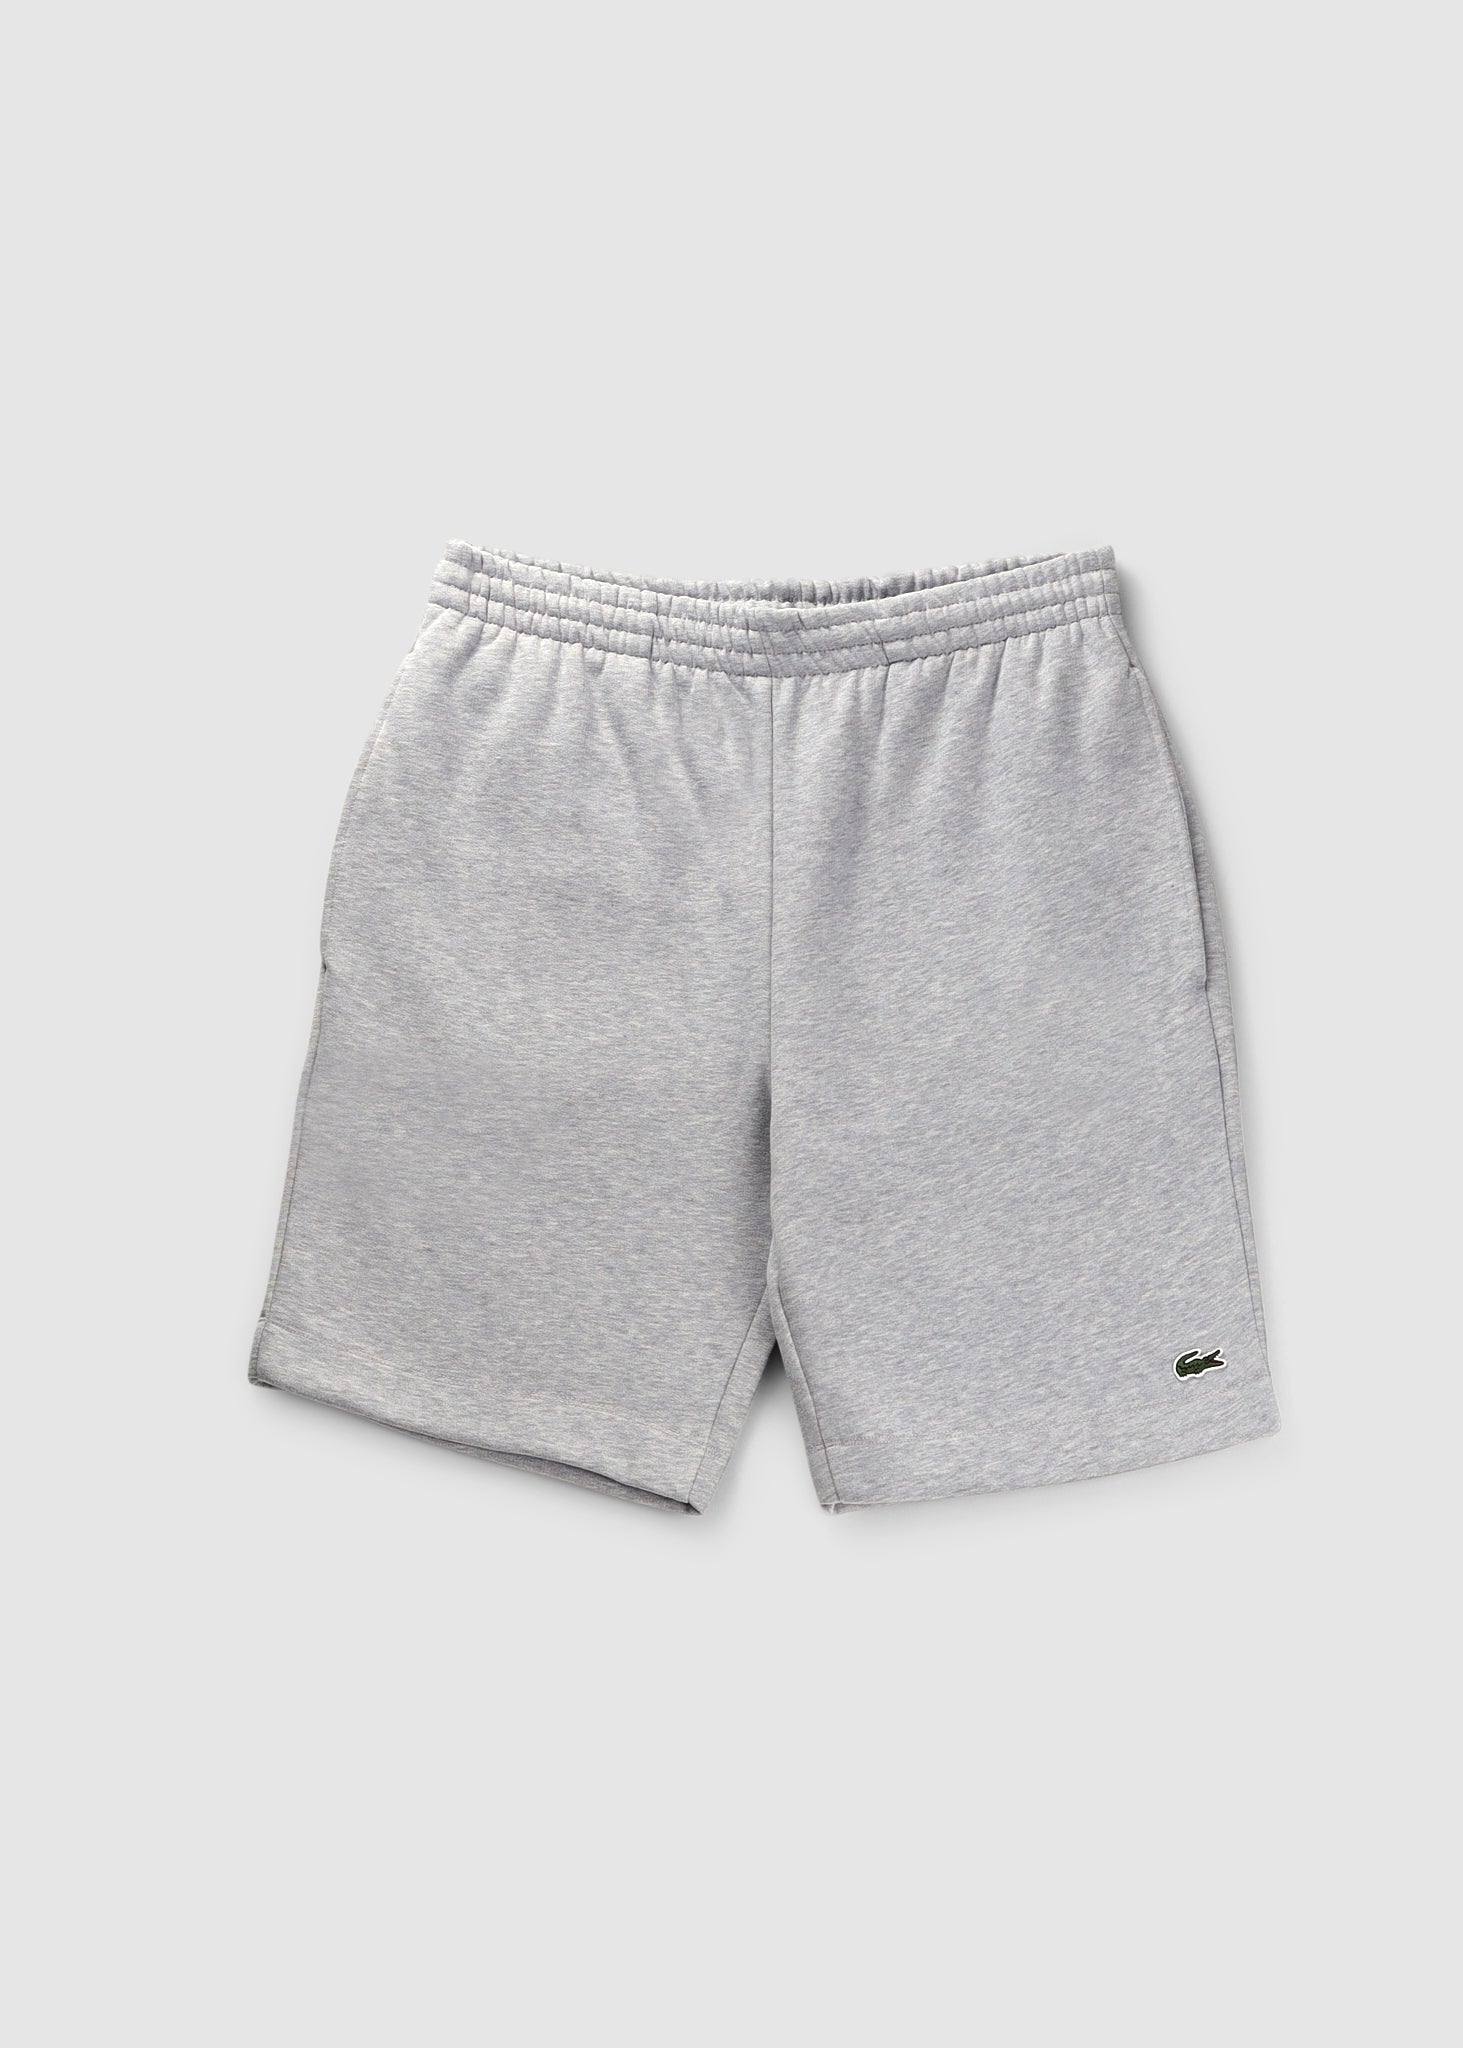 Image of Lacoste Mens Organic Brushed Cotton Fleece Shorts In Grey